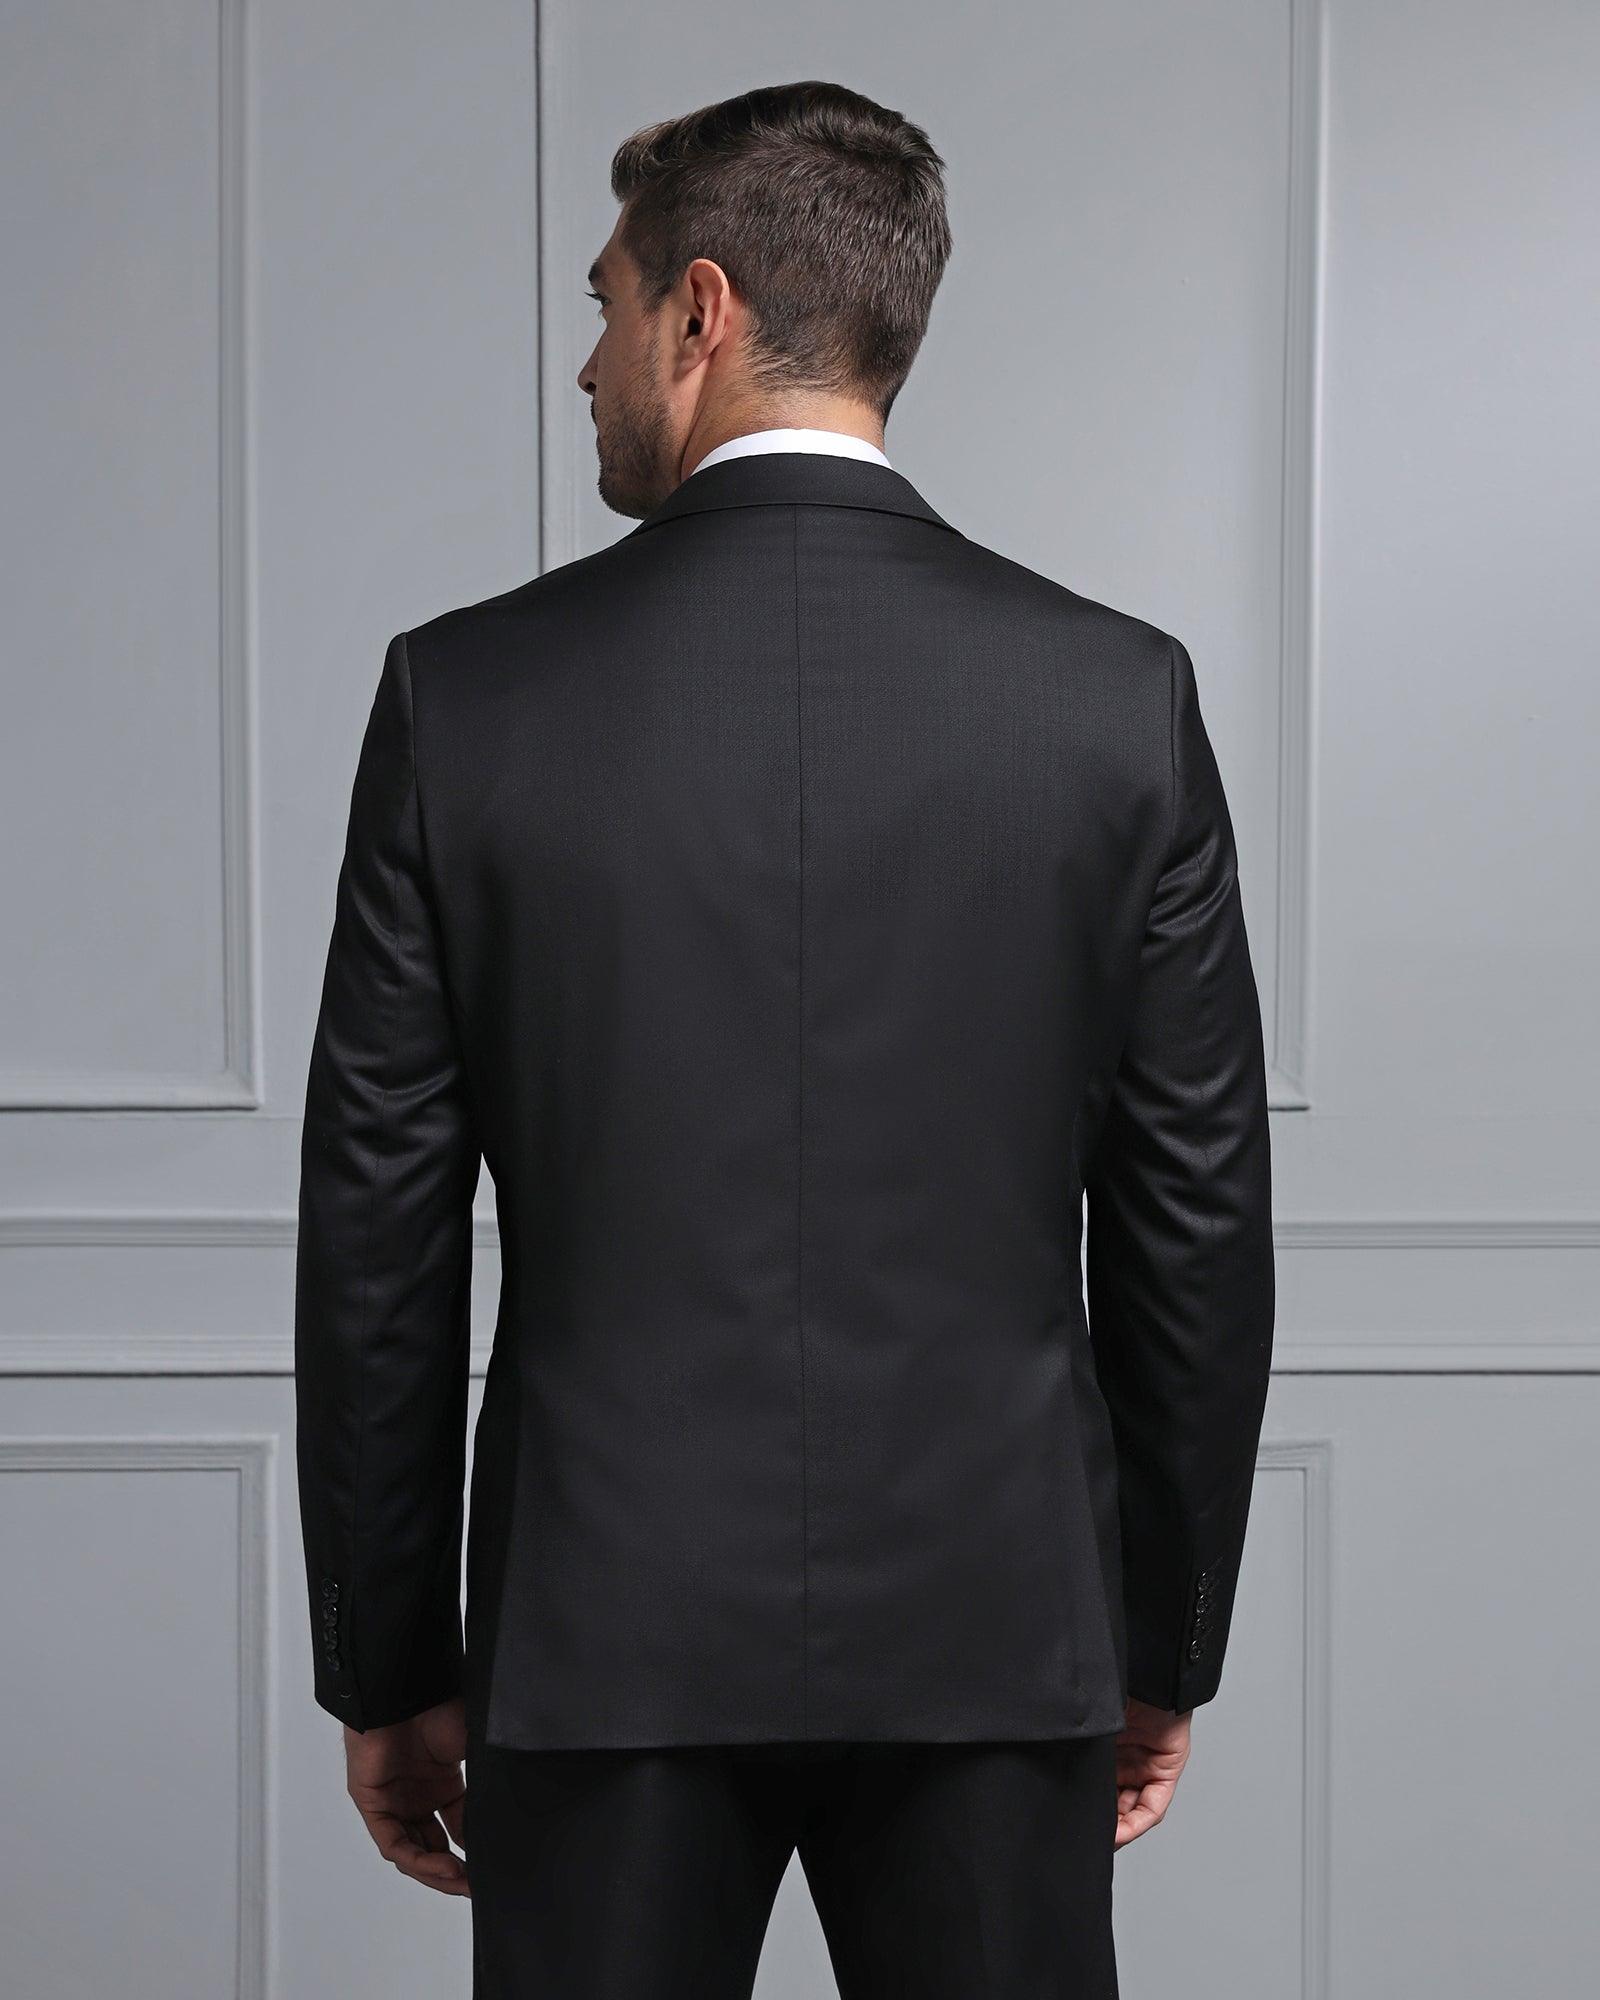 Luxe Three Piece Black Solid Formal Suits - Jetz